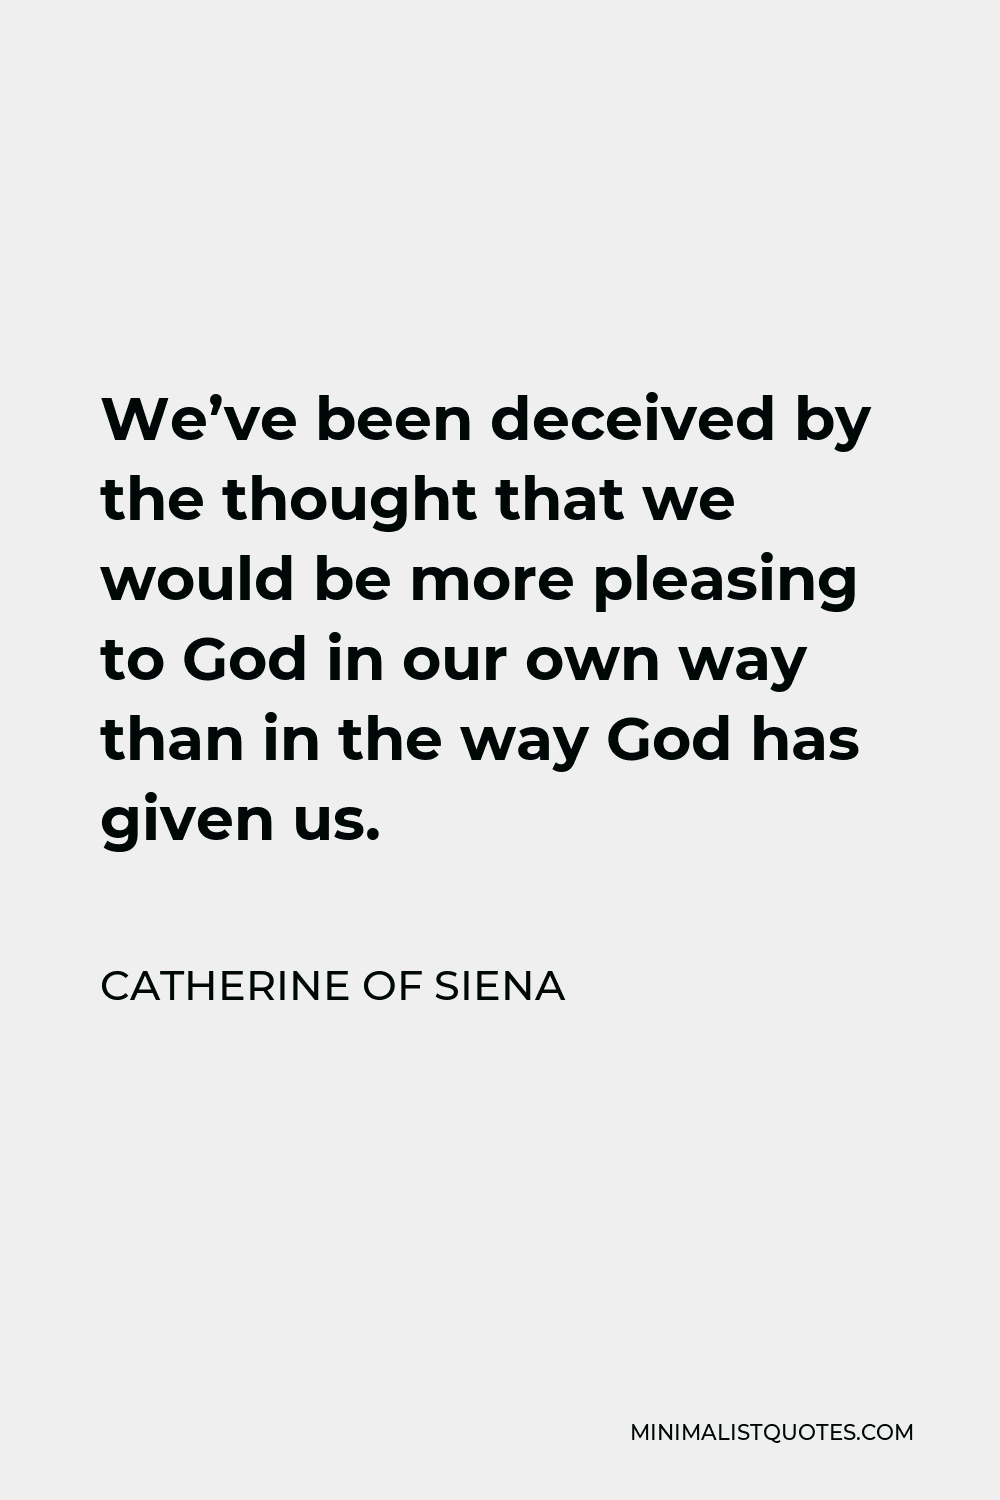 Catherine of Siena Quote - We’ve been deceived by the thought that we would be more pleasing to God in our own way than in the way God has given us.